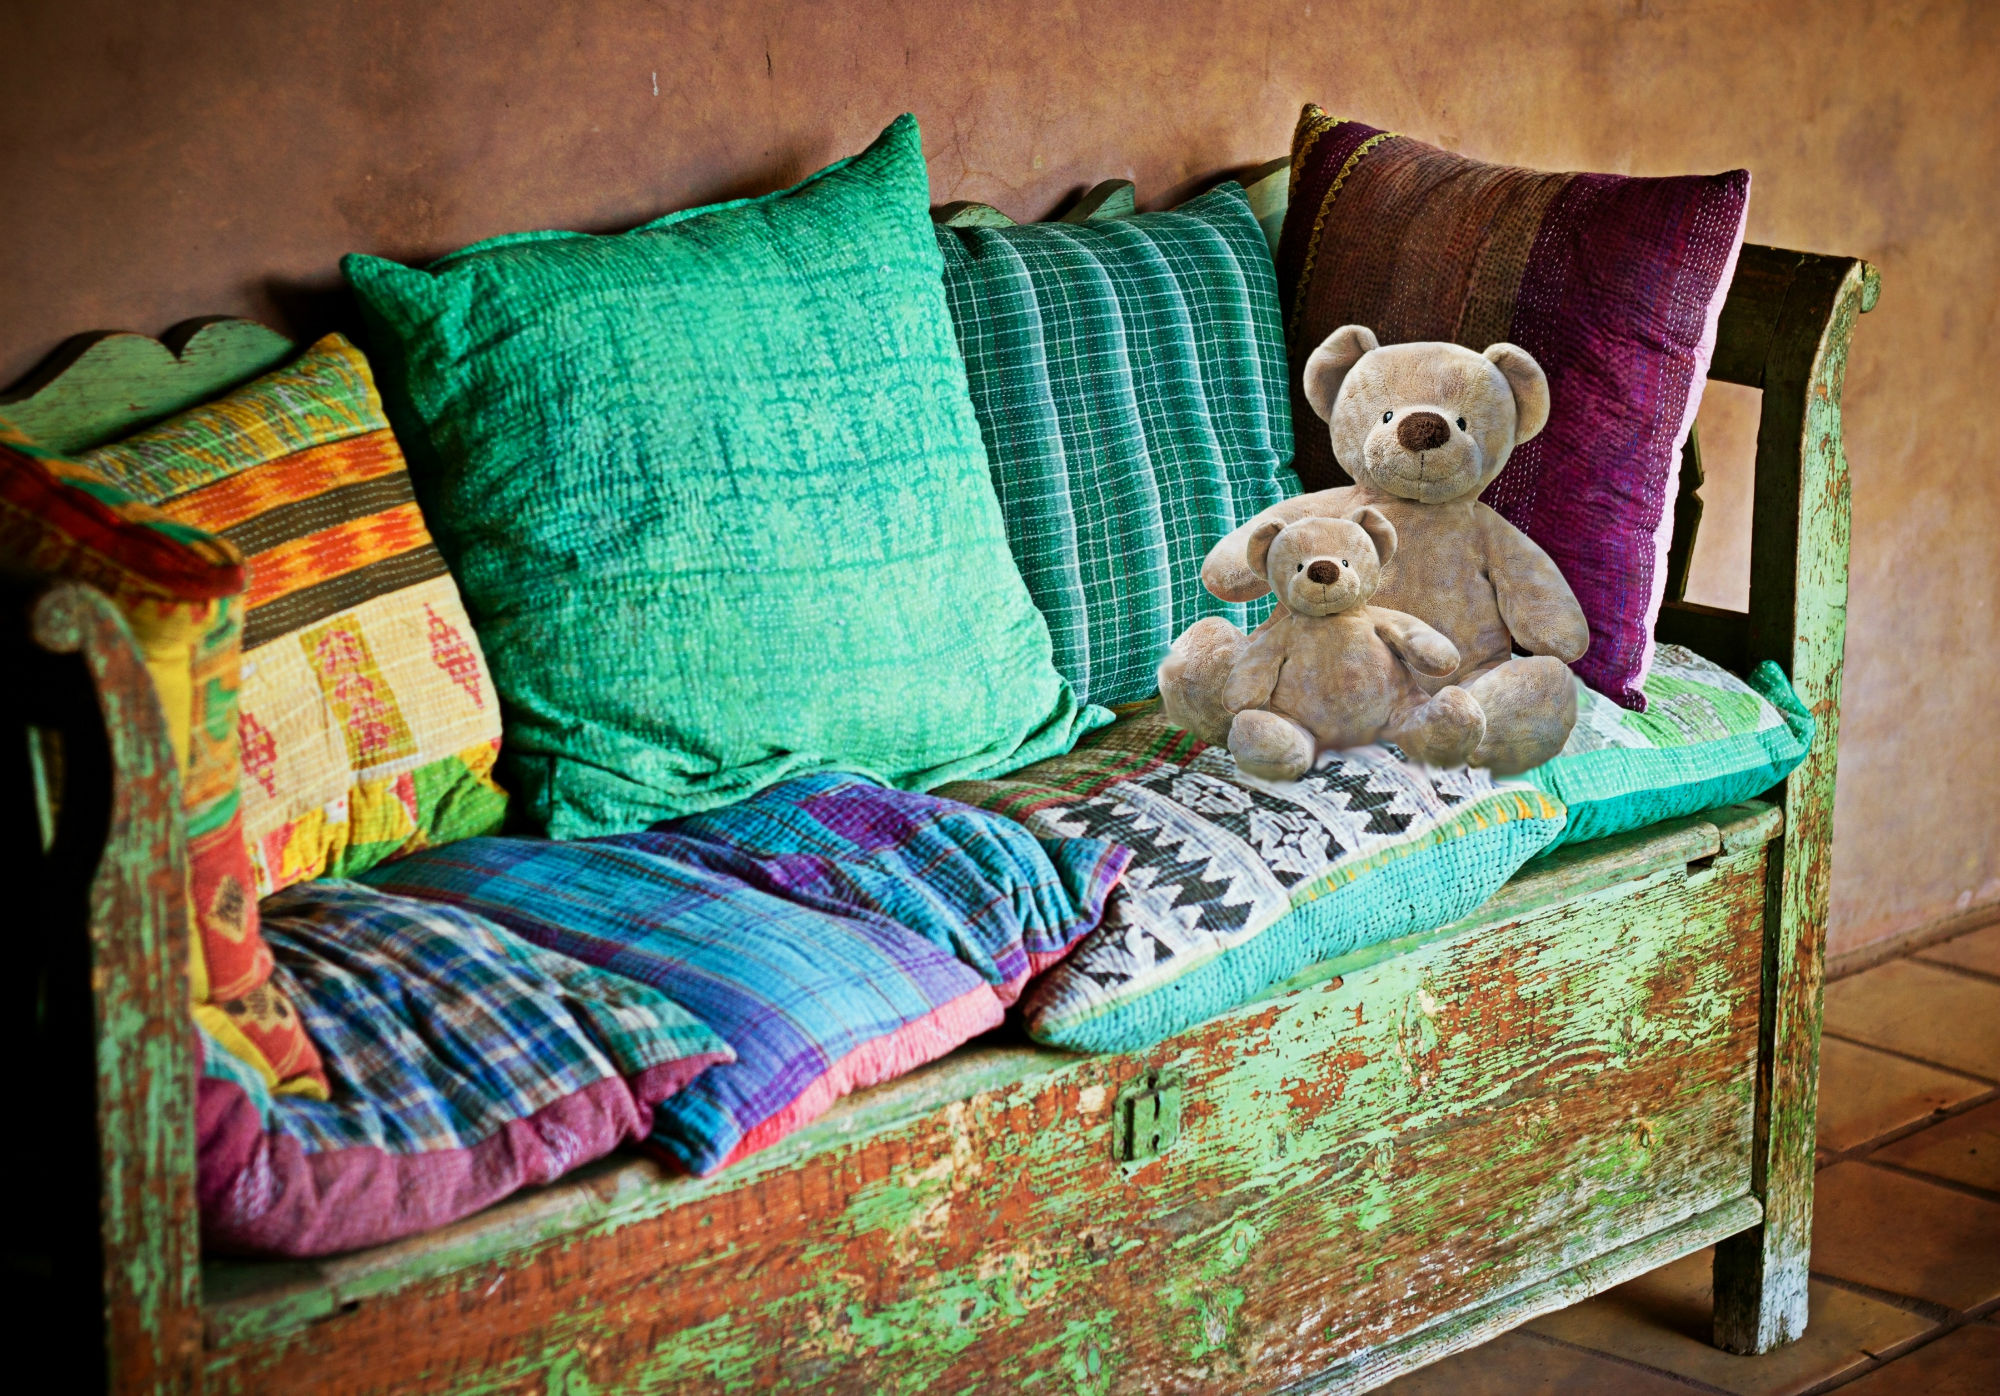 A Colourful Bed Bug Free Sofa with Pillows and Teddy Bears